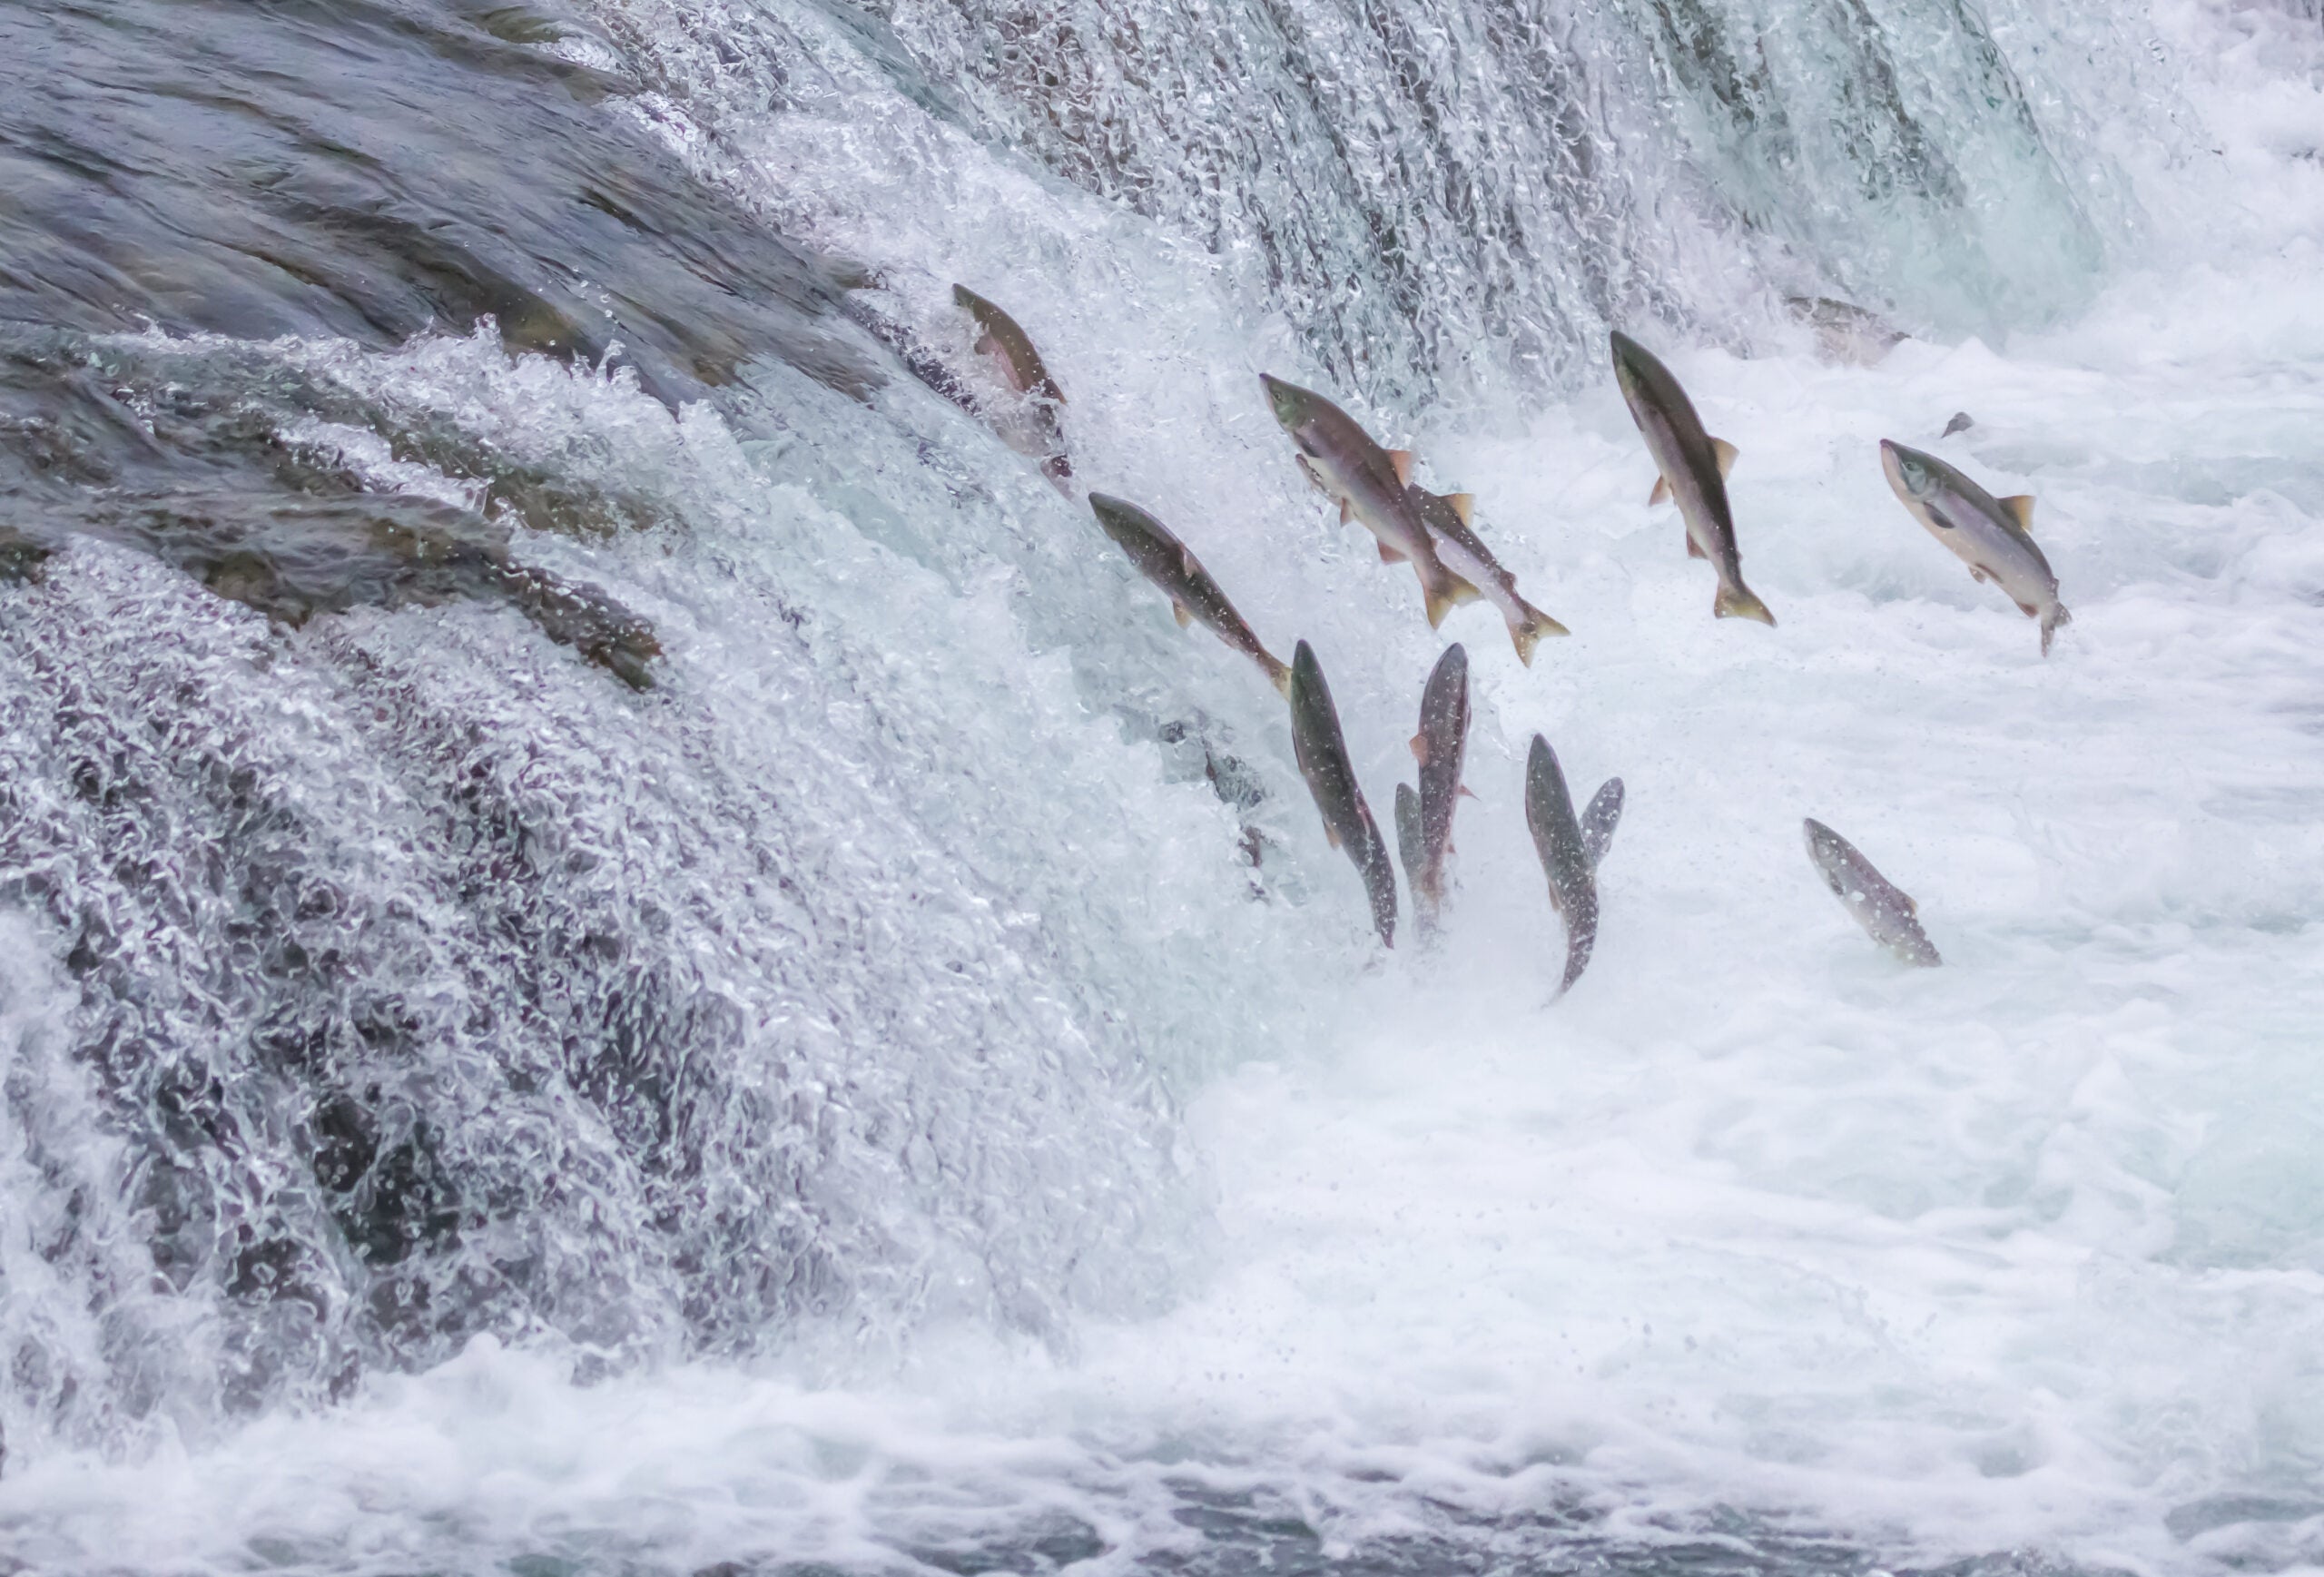 Wild salmon jumping up a river during spawning season.